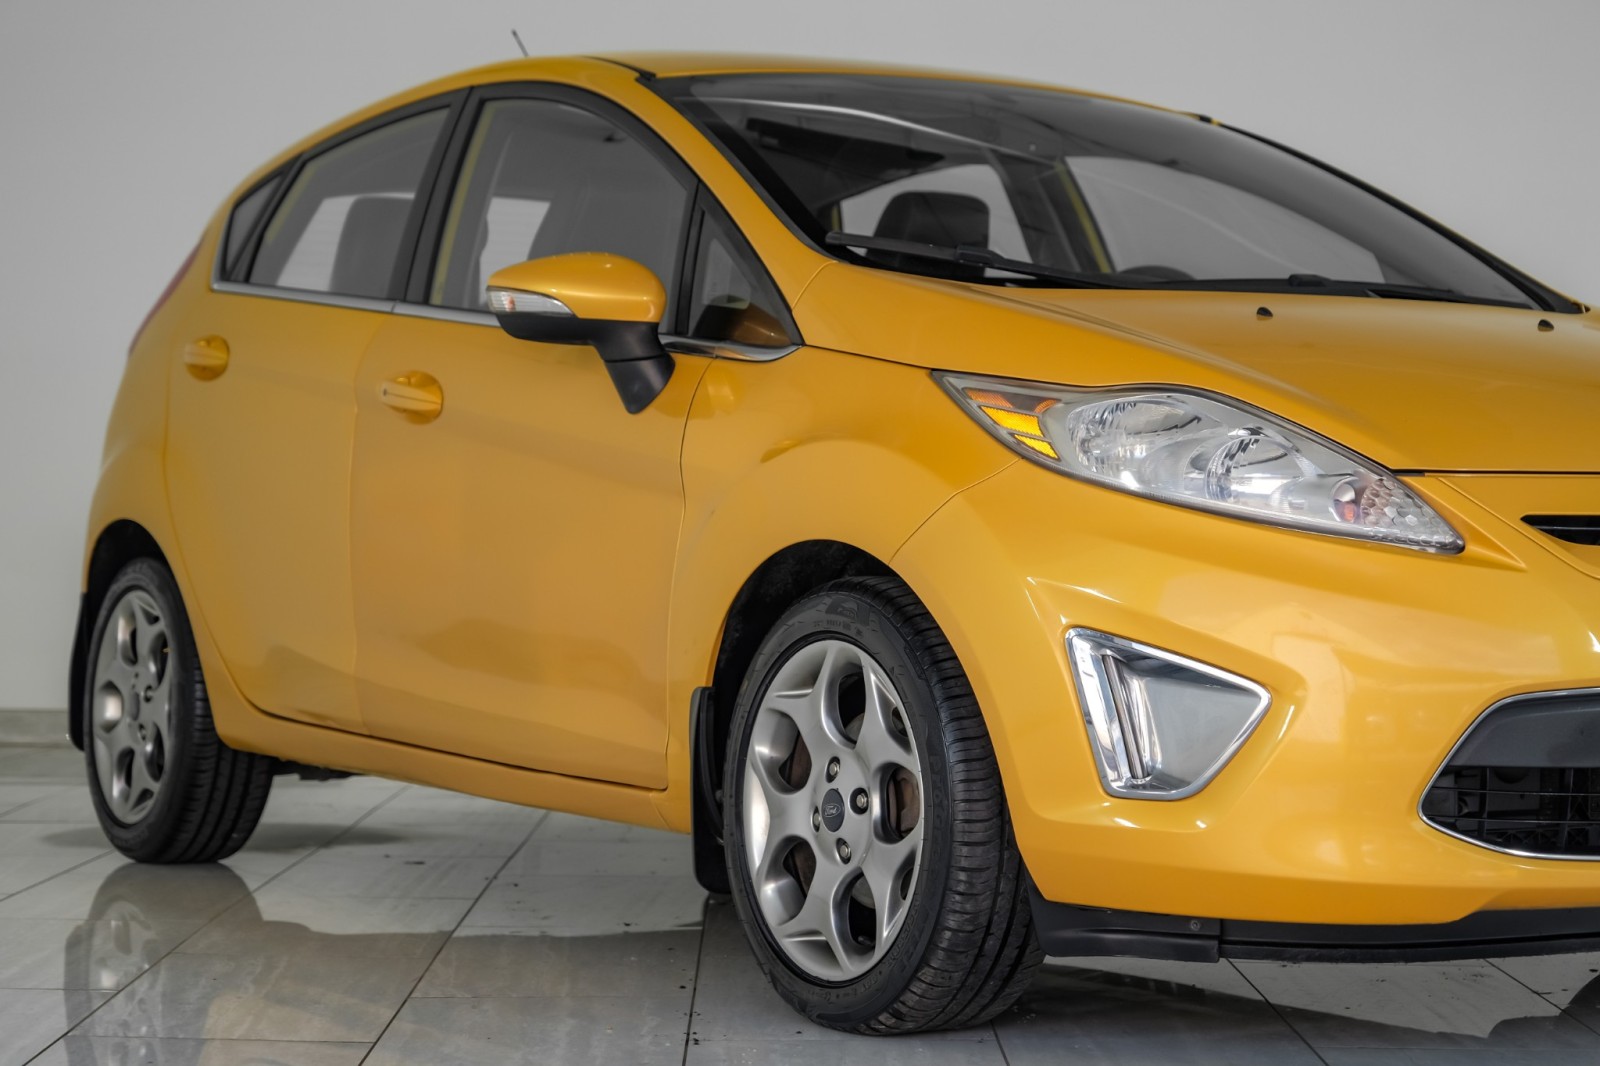 2011 Ford Fiesta SES HATCHBACK AUTOMATIC LEATHER HEATED SEATS KEYLE 3